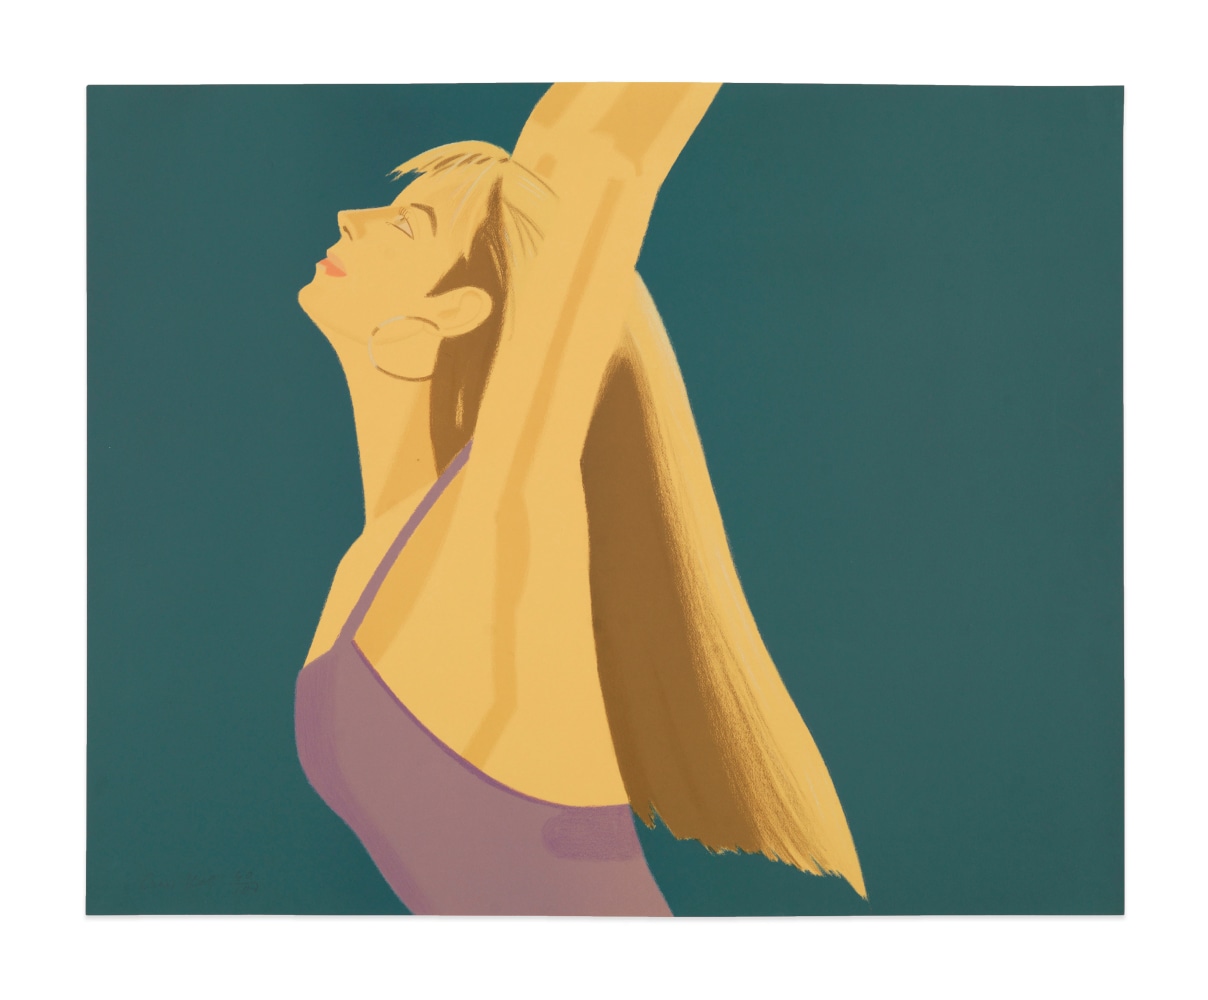 Color lithograph by Alex Katz featuring the profile of a woman wearing a lavender top and gold hoop earrings looking upward. The side-view of her arms are stretched out above her head against a blue background